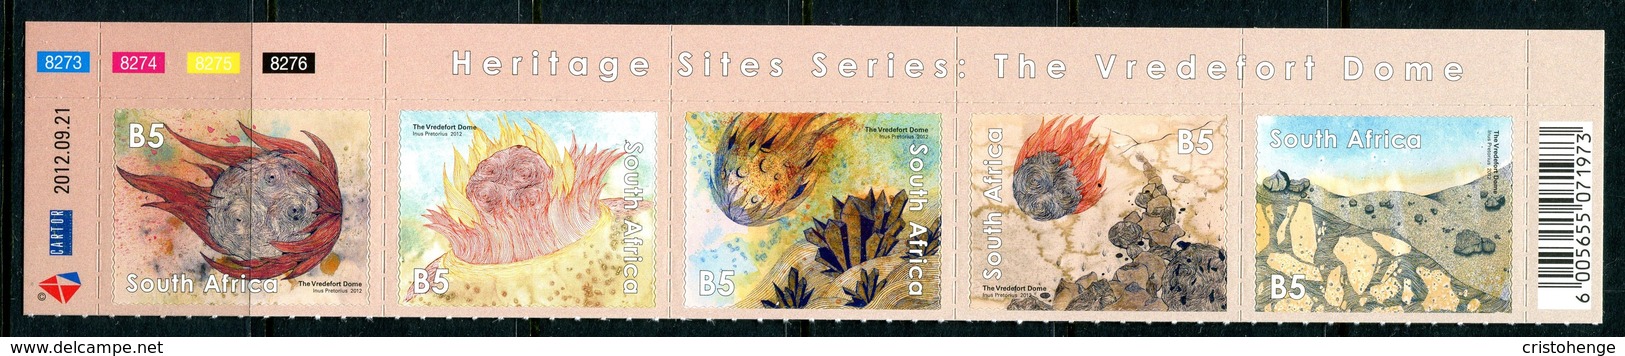 South Africa 2012 South African Heritage Sites - The Vredefort Dome Strip MNH (SG 1981-1985) - Unused Stamps